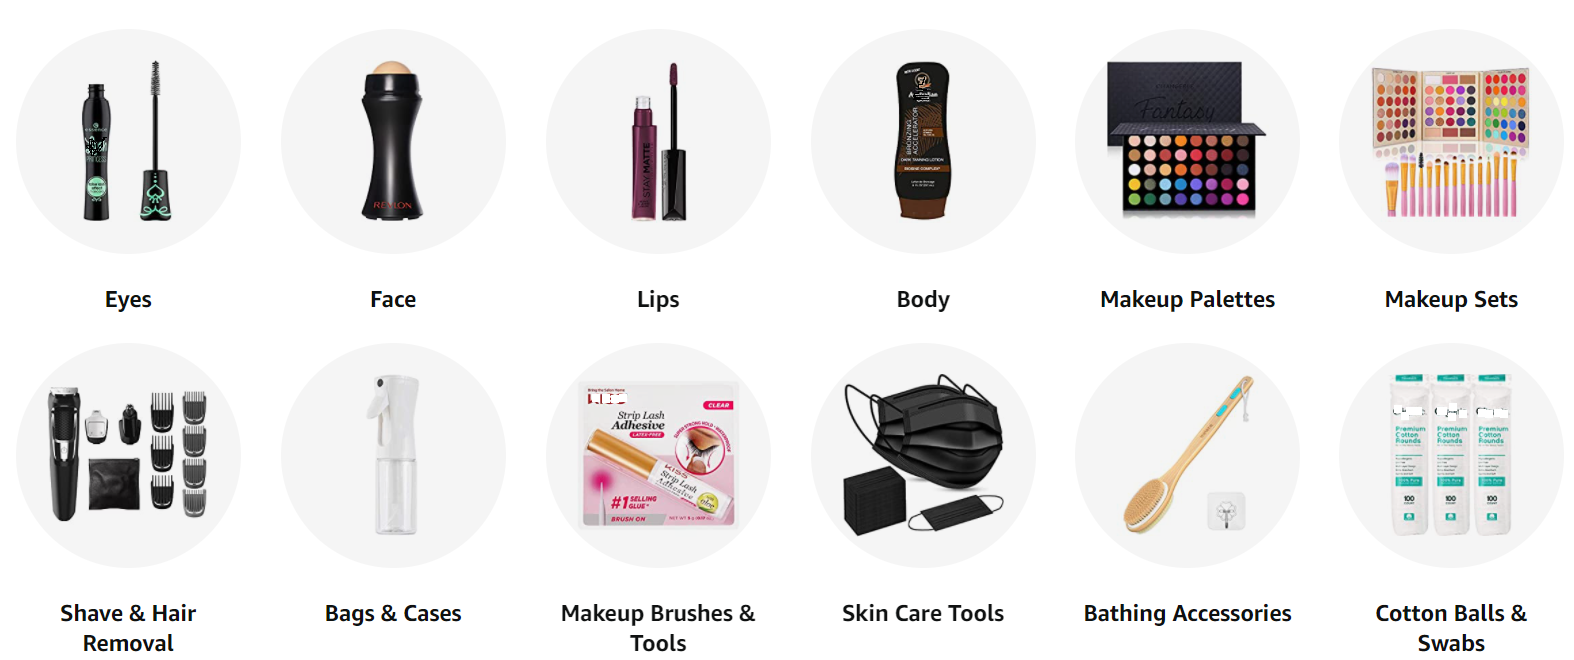 https://images.ctfassets.net/7st9xm42xppc/75wPcgogx3NnnEYzTGjVpb/92d1bb51bfeb14a678efa4ee60025b7d/best_Beauty_products_to_sell_online.png?w=1574&h=660&q=80&fm=png